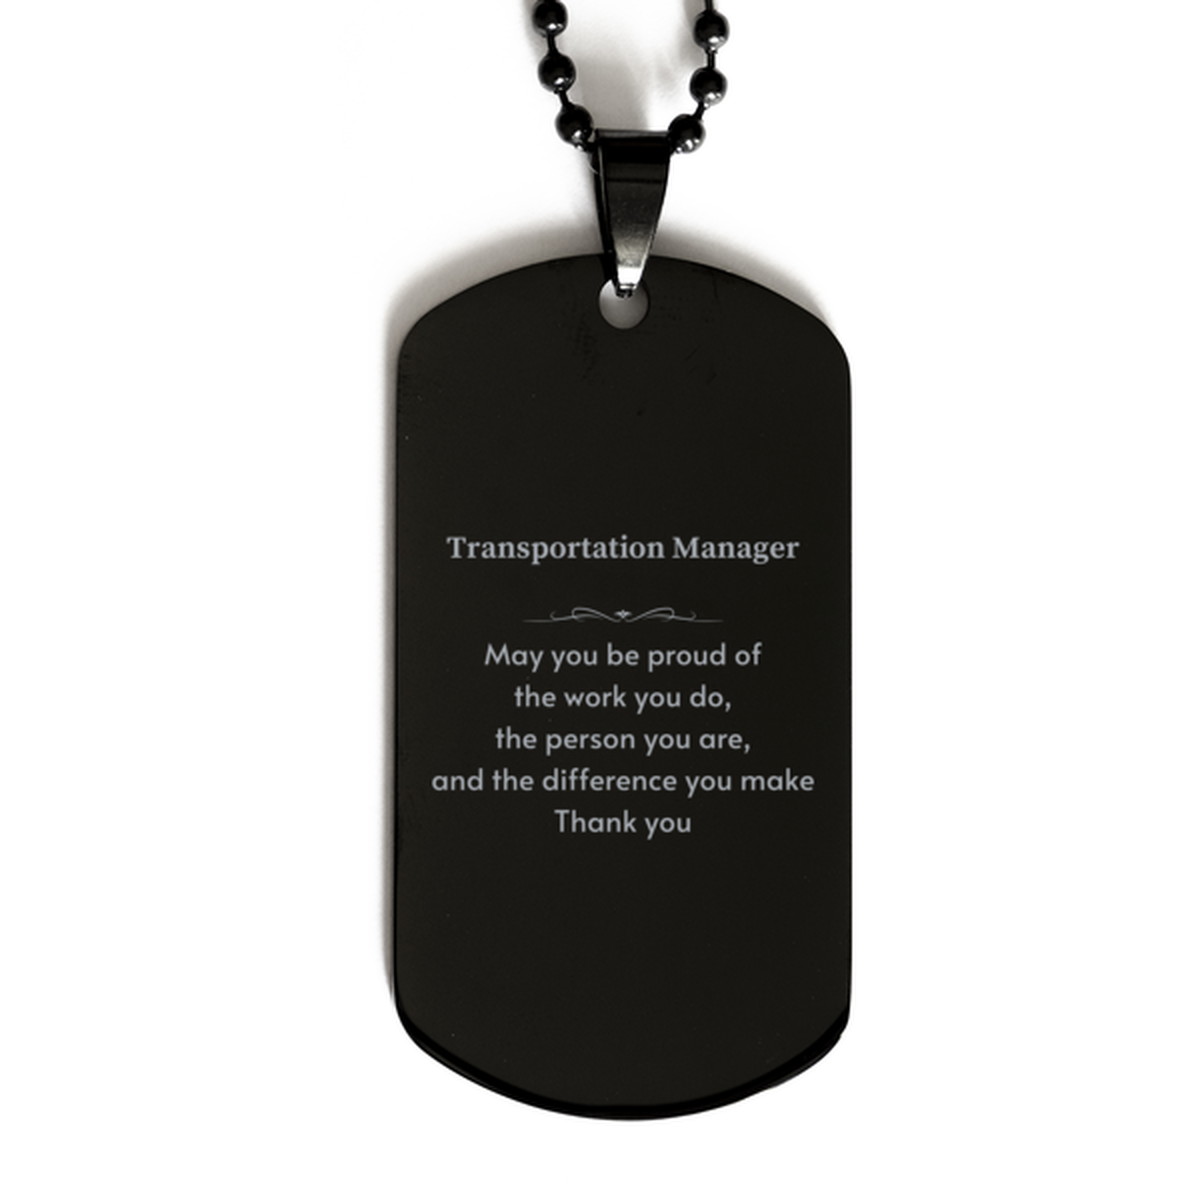 Heartwarming Black Dog Tag Retirement Coworkers Gifts for Transportation Manager, Transportation Manager May You be proud of the work you do, the person you are Gifts for Boss Men Women Friends